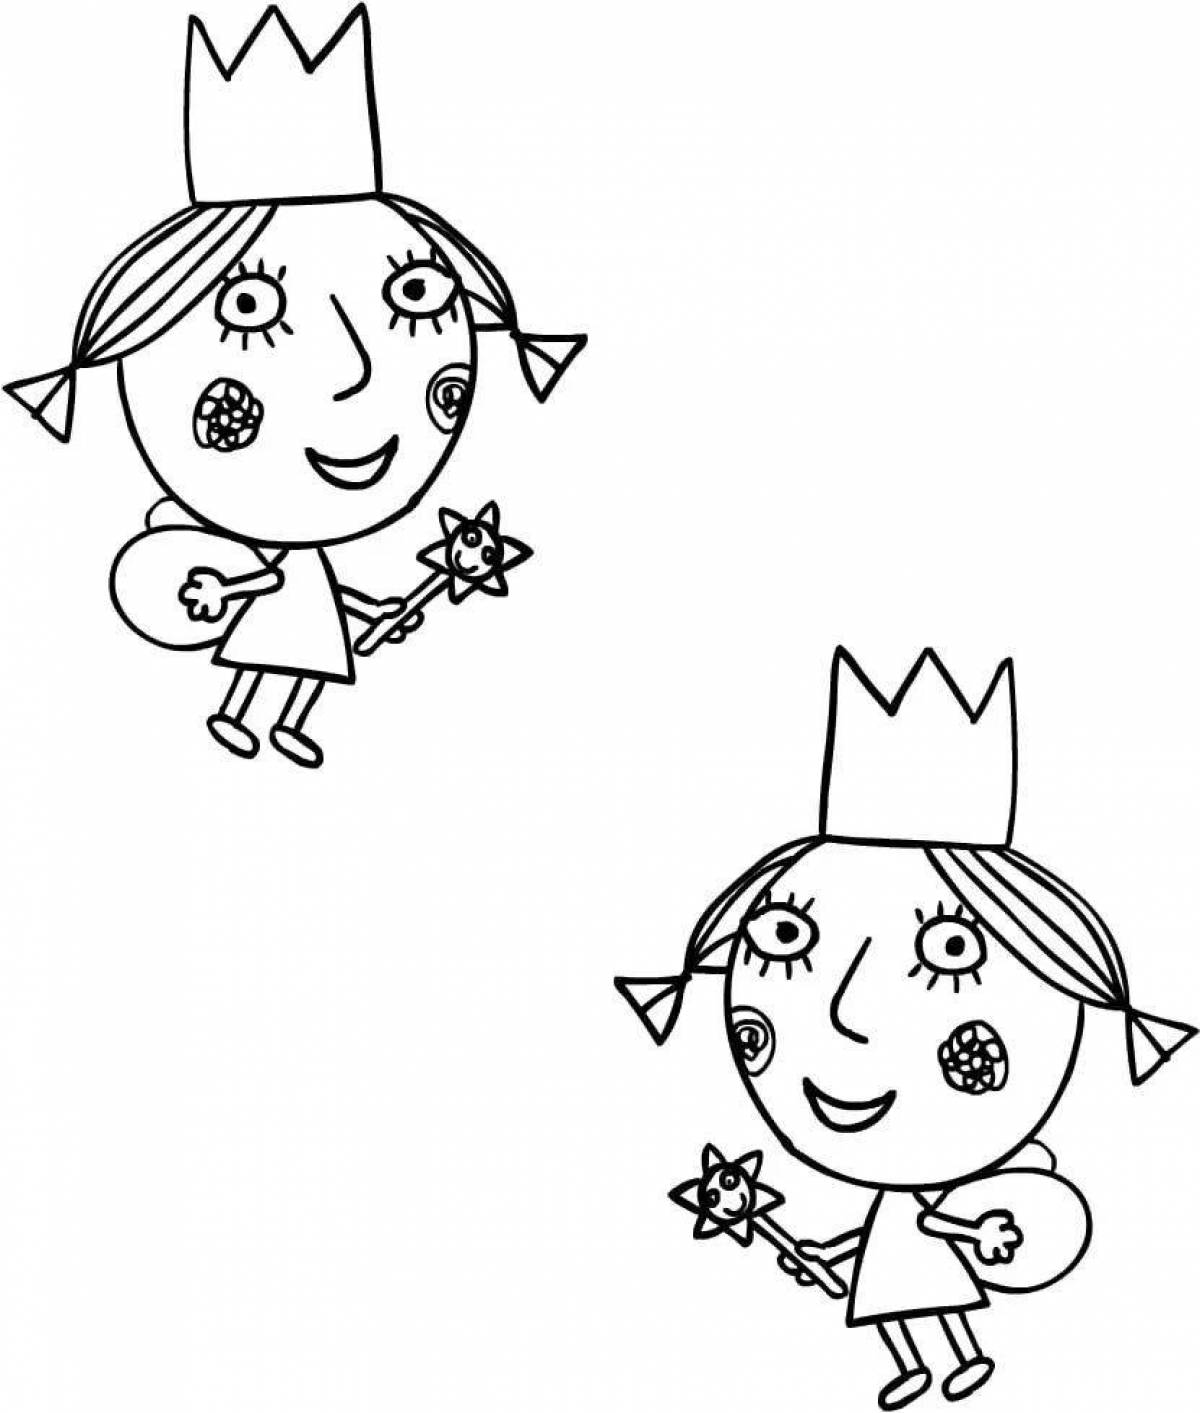 Ben and holly's little kingdom glitter coloring book